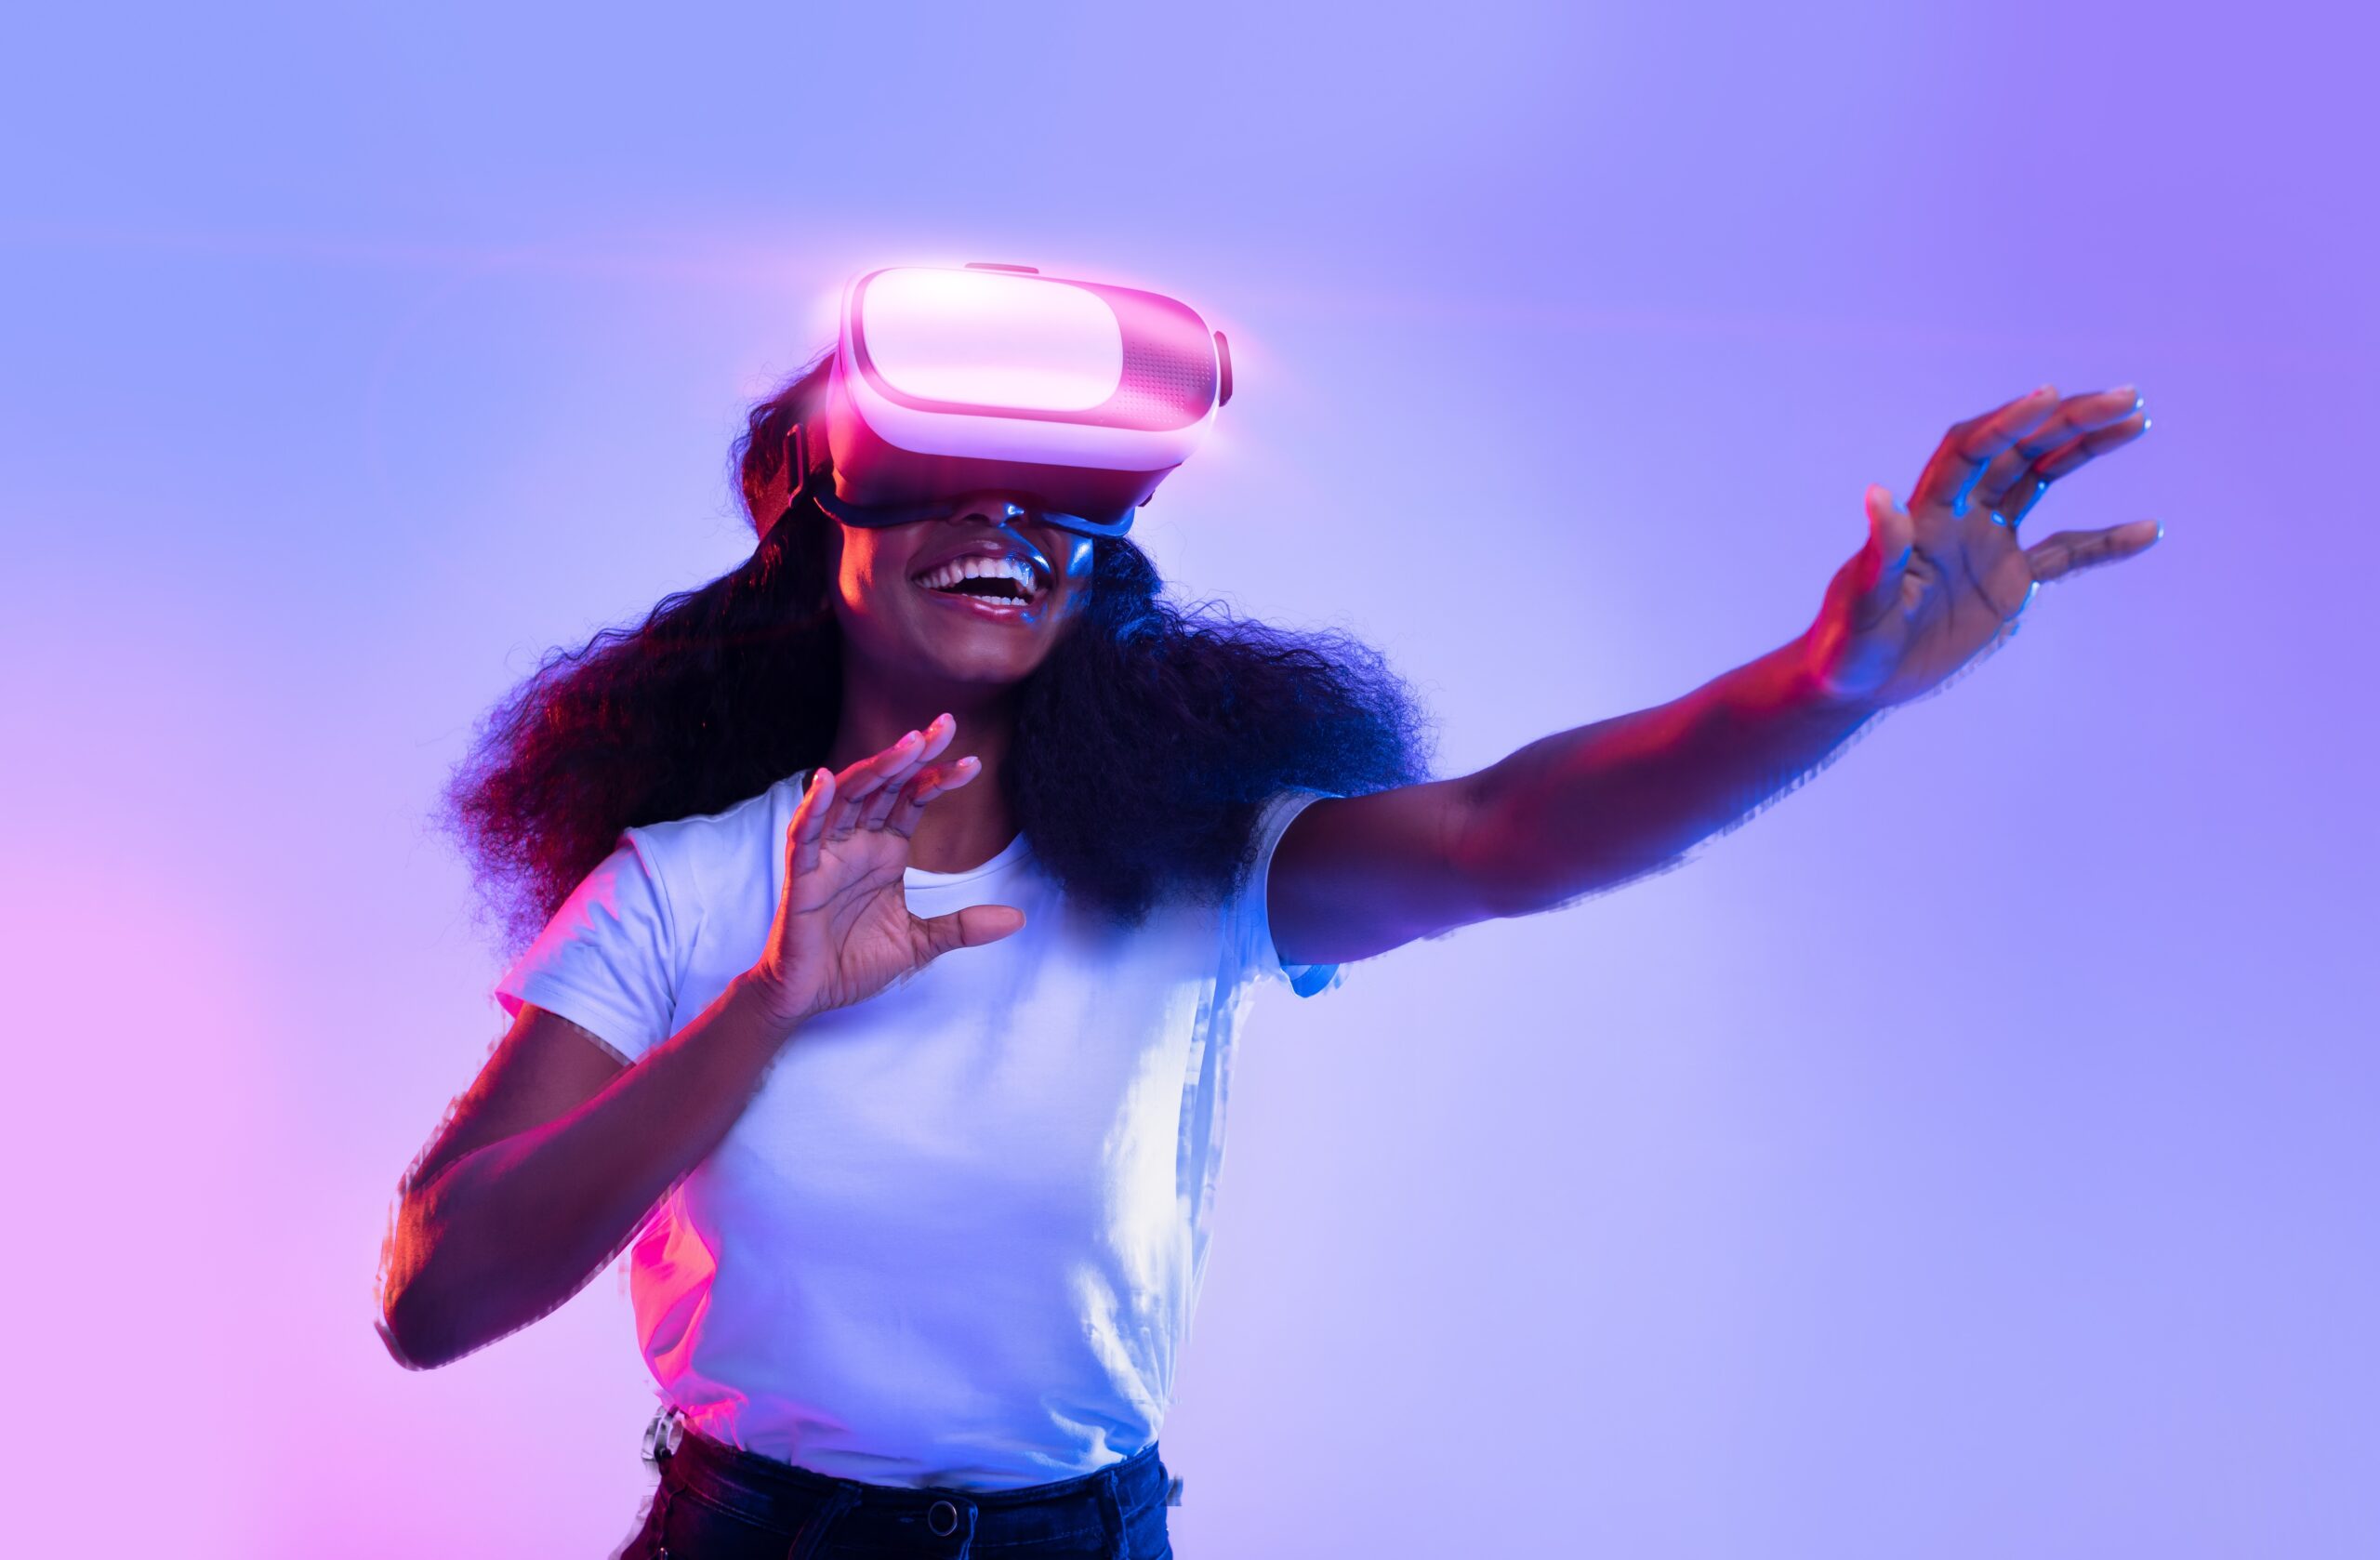 A young woman wearing a white t-shirt is experiencing virtual reality with a VR headset. She is smiling broadly, with one hand raised as if interacting with a virtual environment. The background is illuminated with a gradient of blue and purple light, giving the scene a futuristic and vibrant feel.